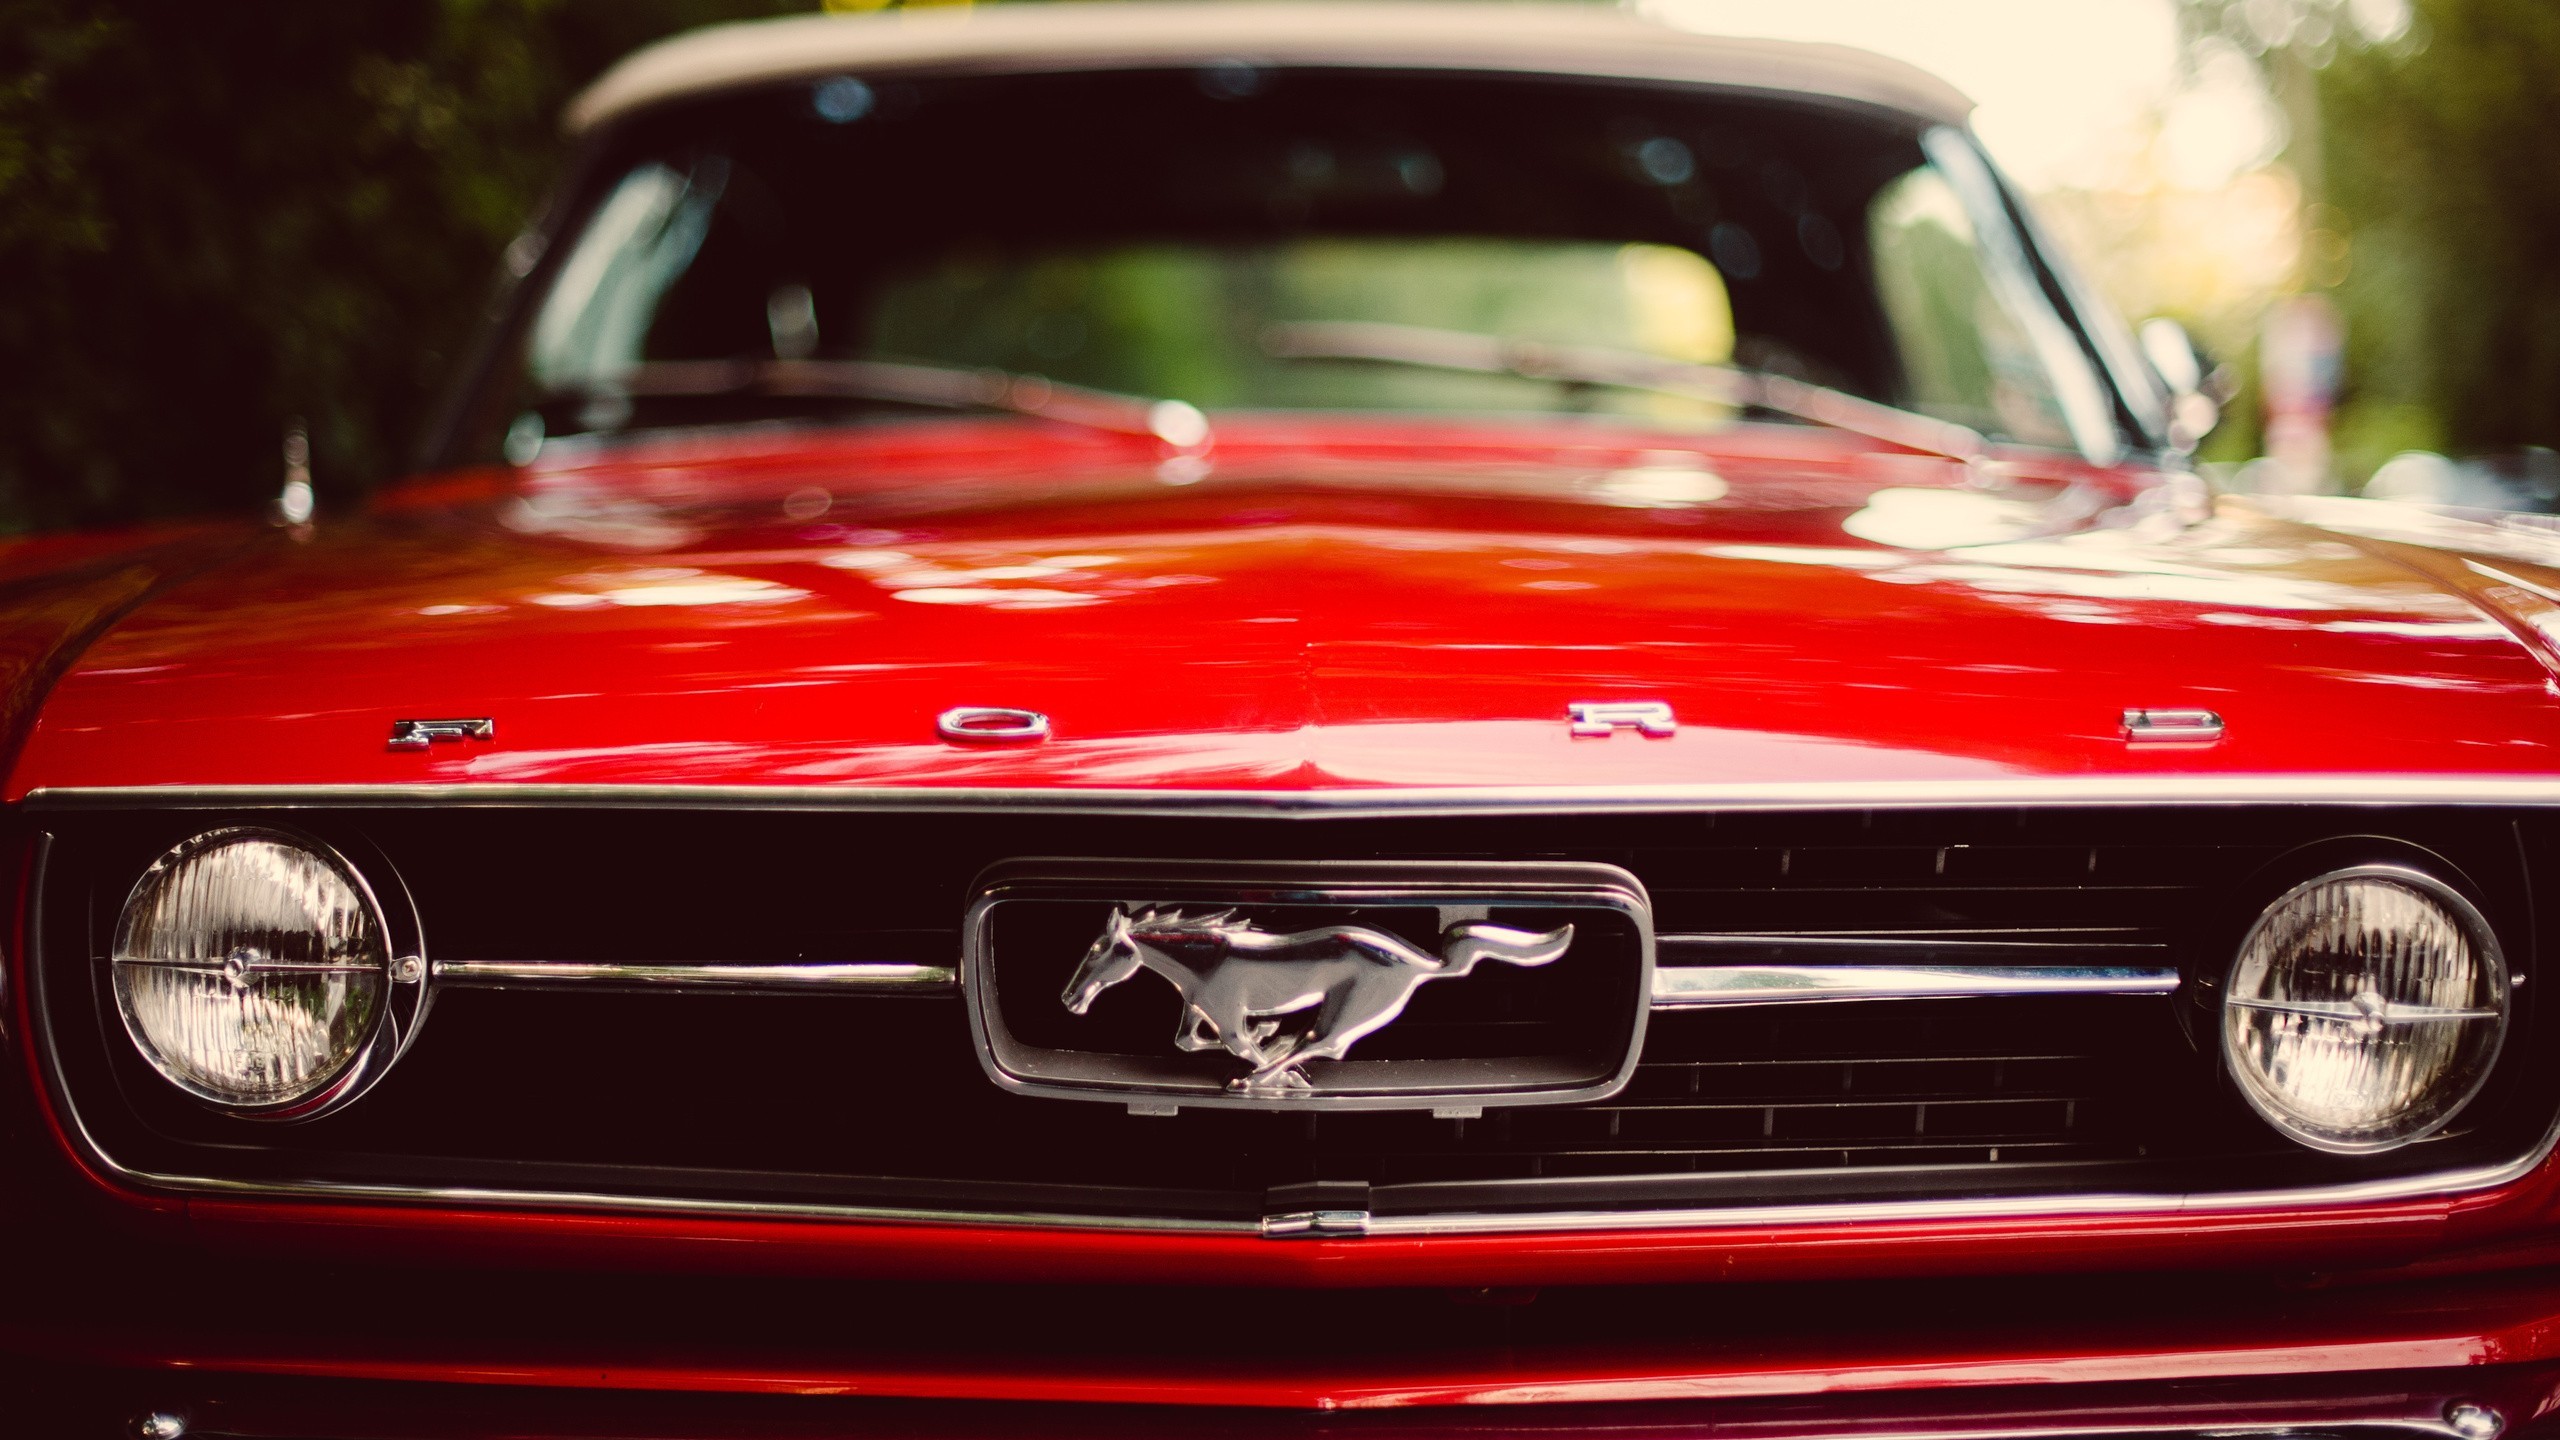 2560x1440 Muscle Cars Ford Mustang Red Car Wallpaper Hd